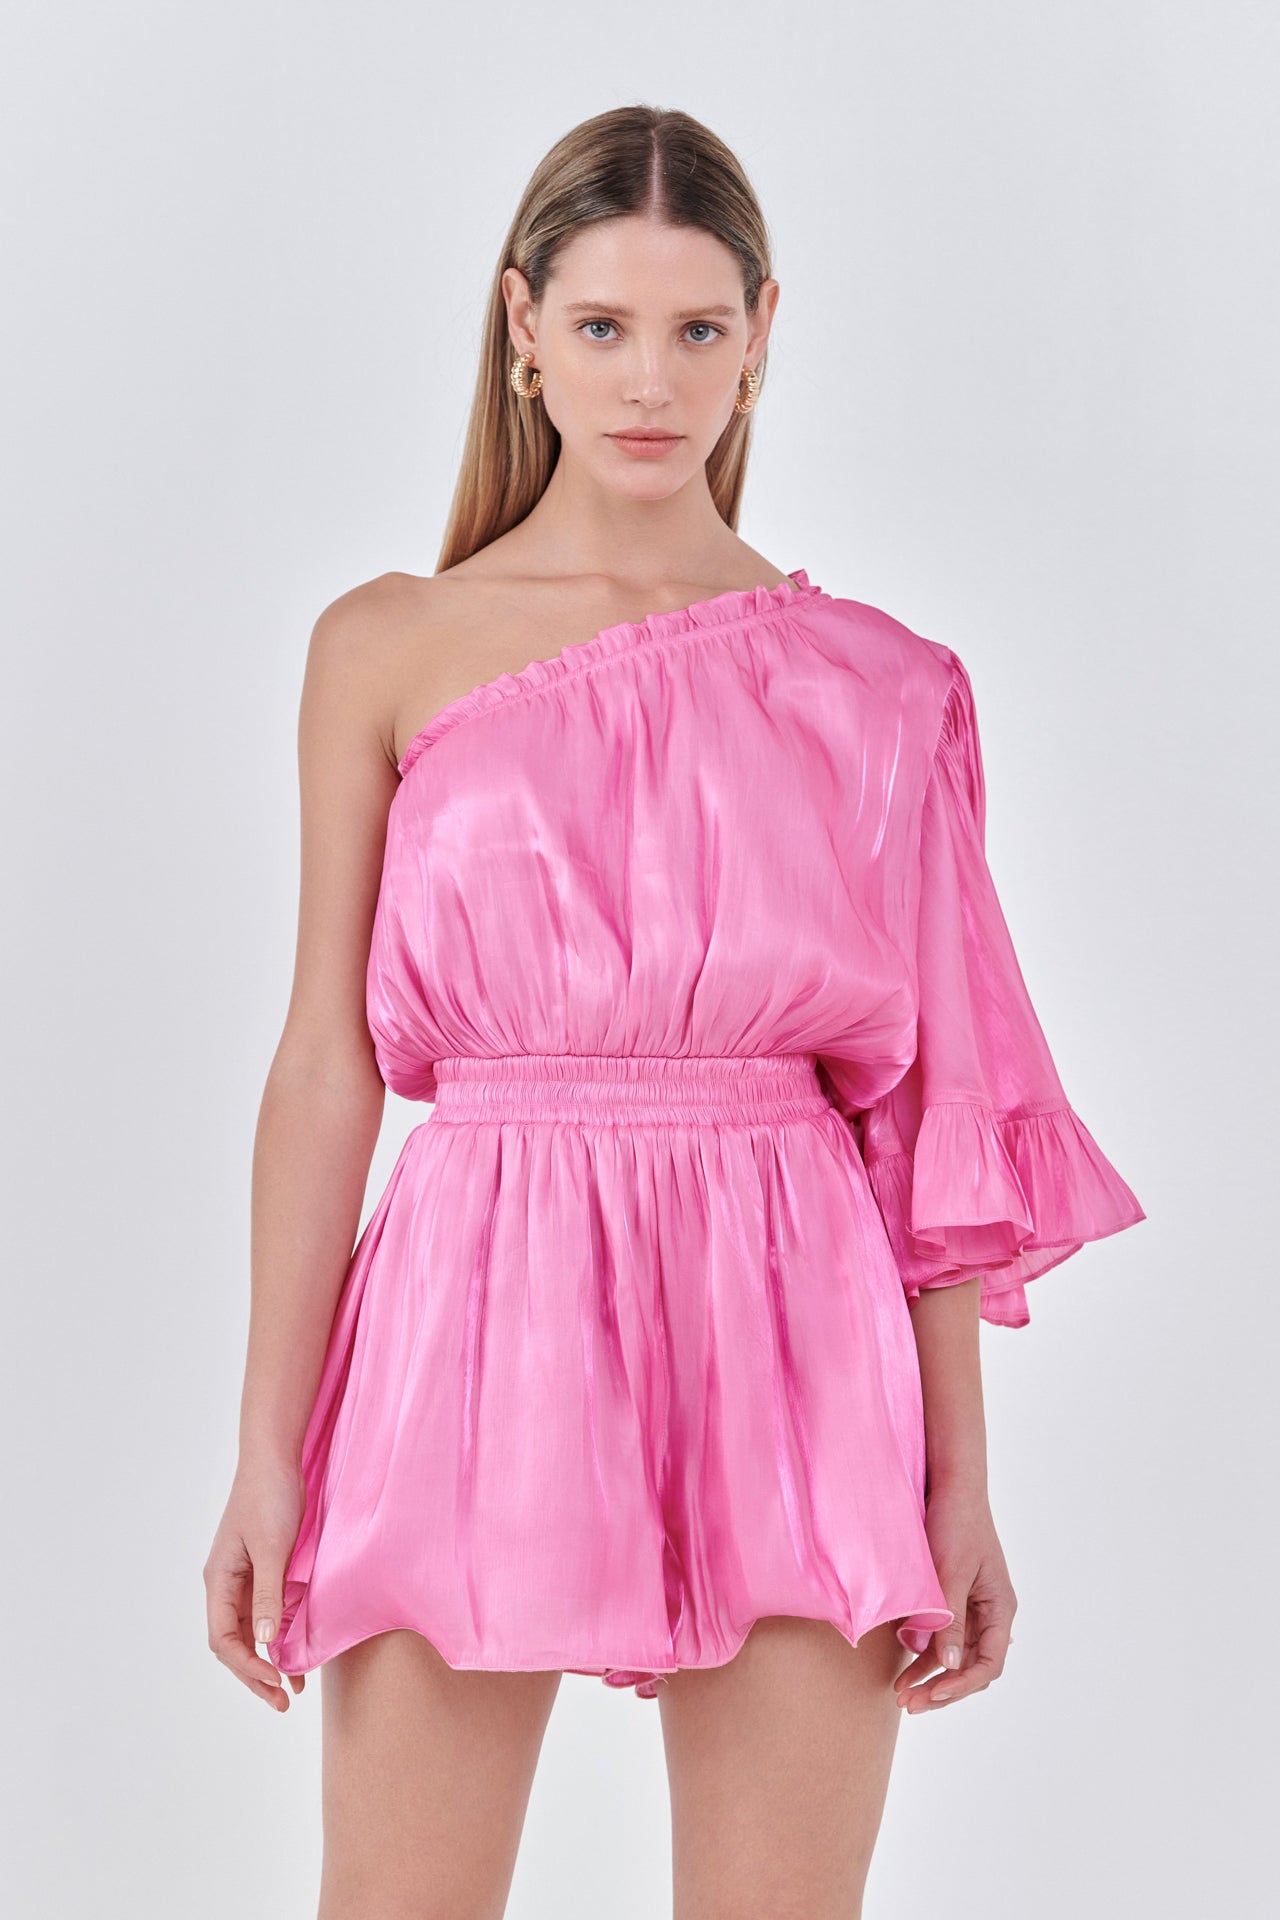 ENDLESS ROSE - One Shoulder Shiny Romper - ROMPERS available at Objectrare